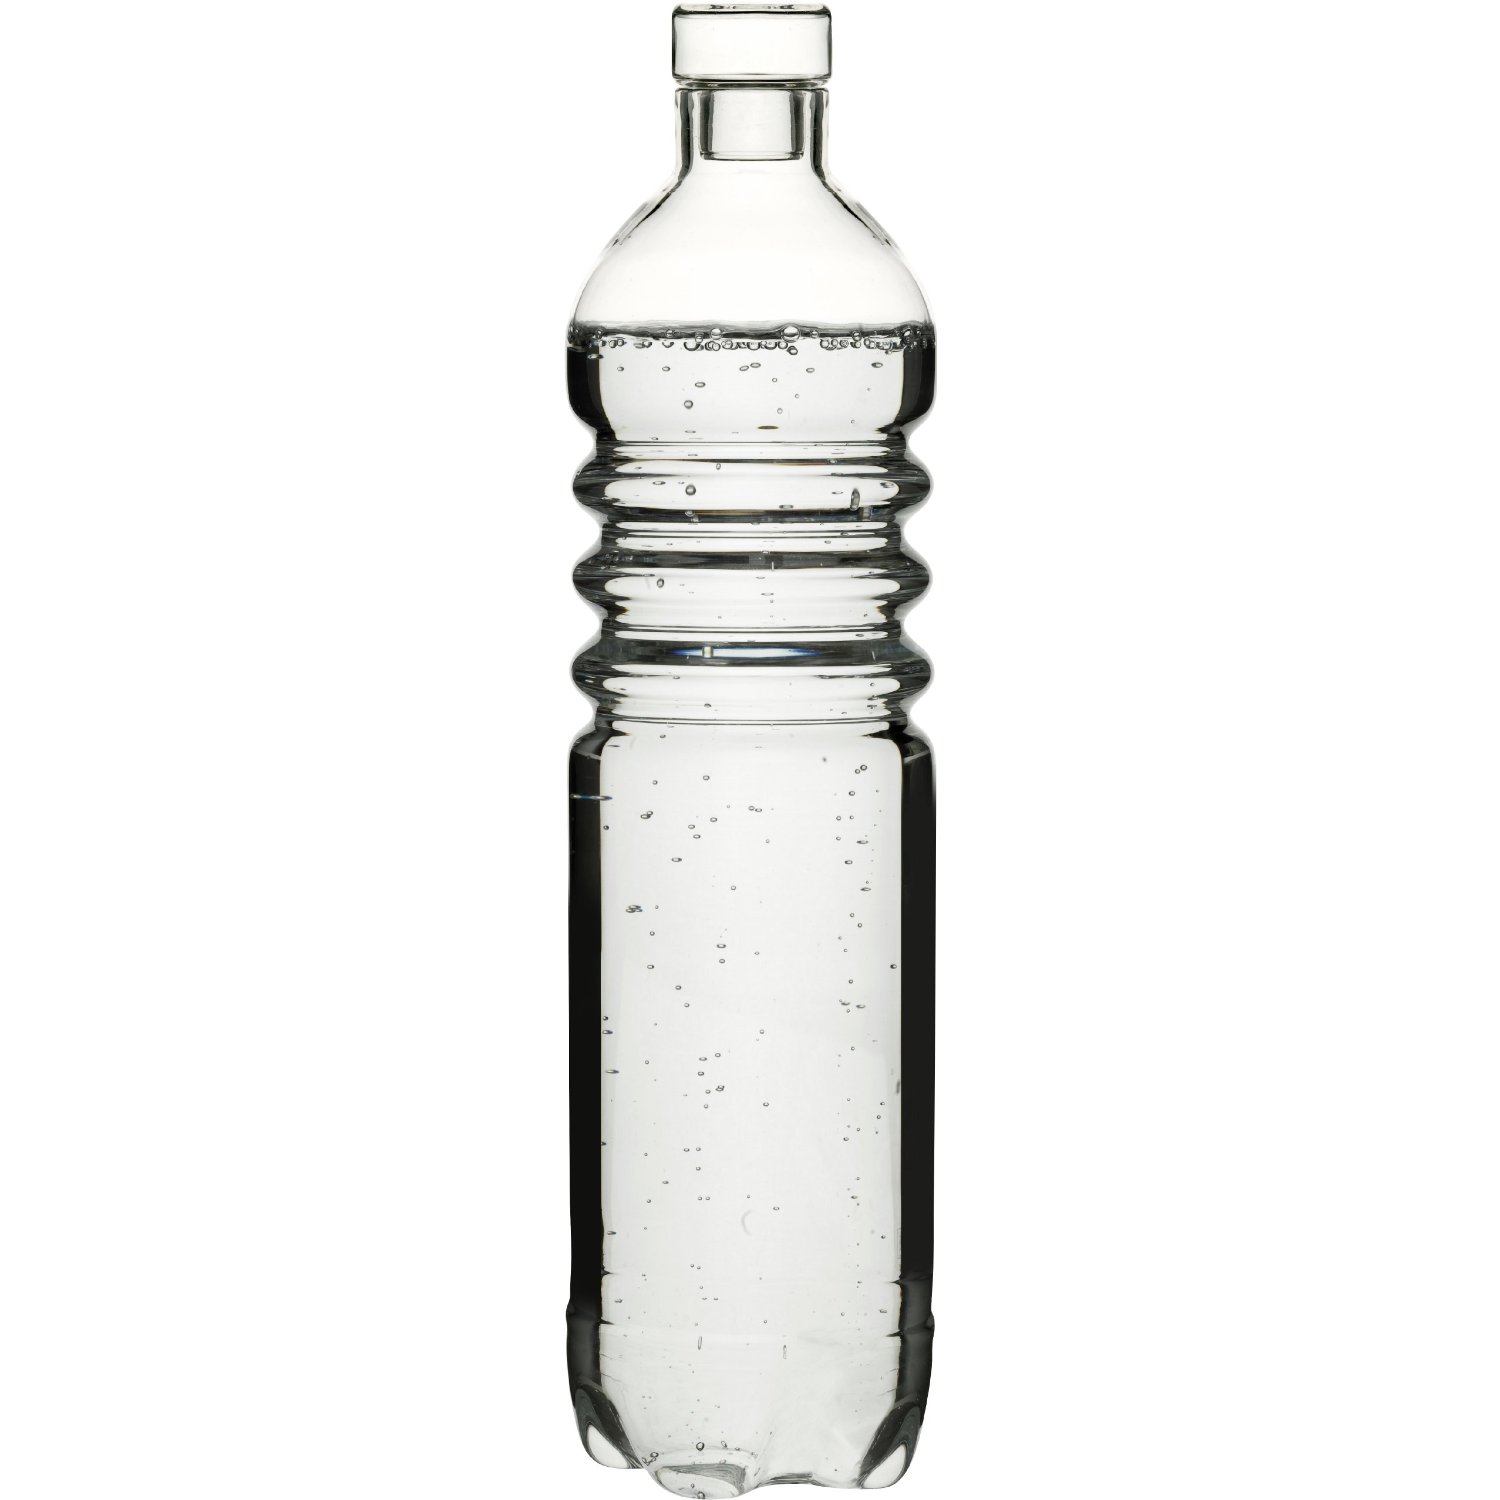 Plastic Water Bottle Black And White Clipart